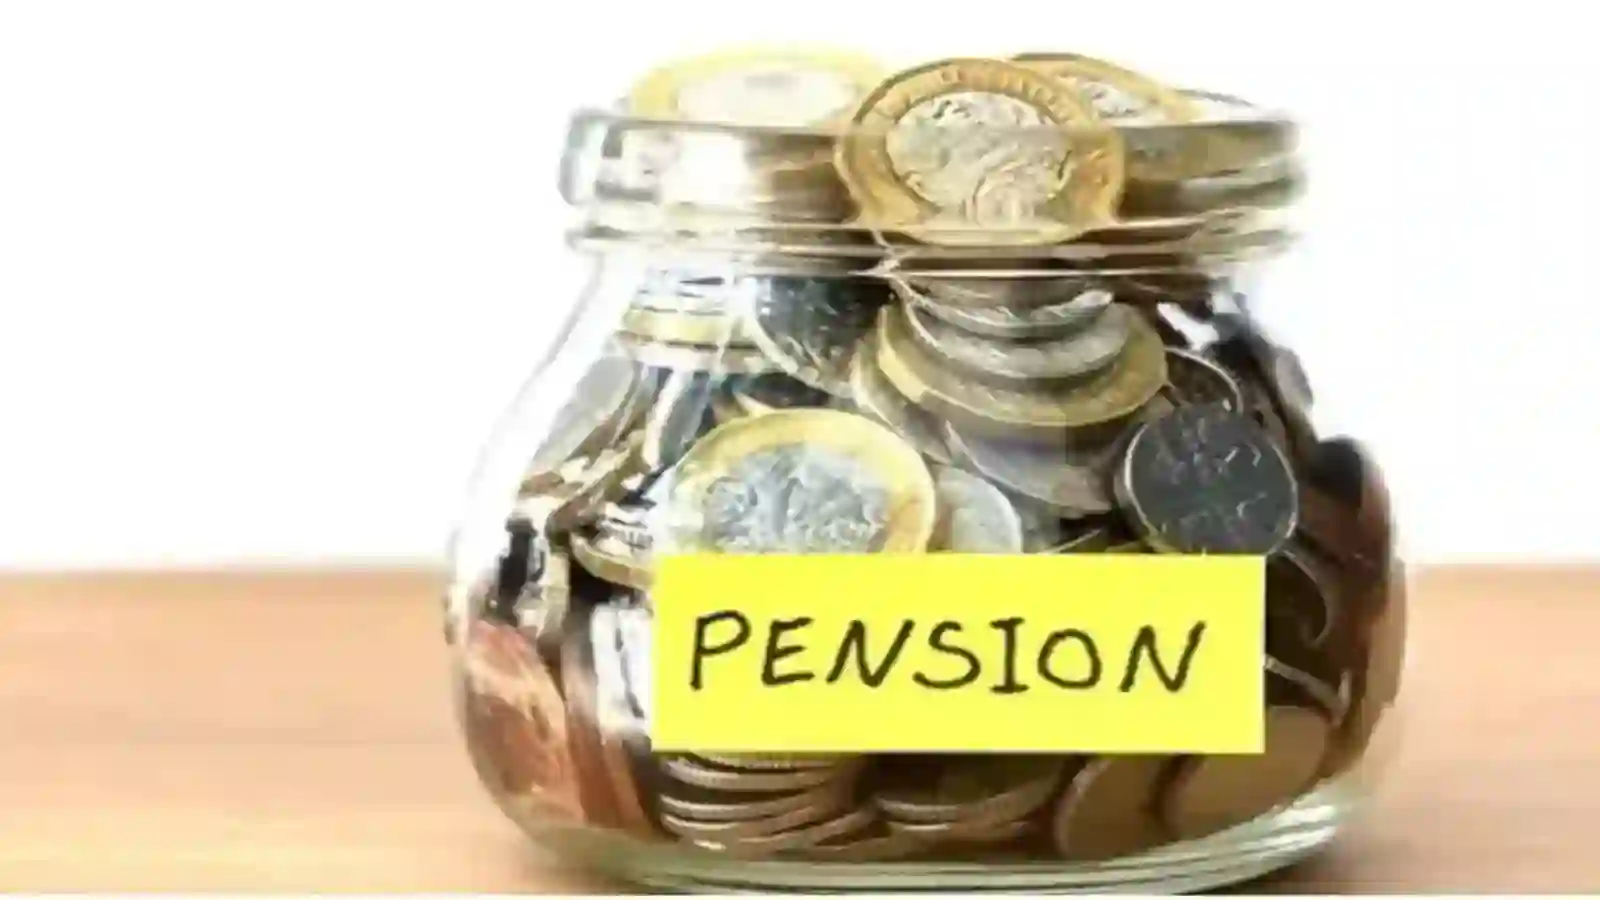 Pension Payments [Photo: Moneycontrol]